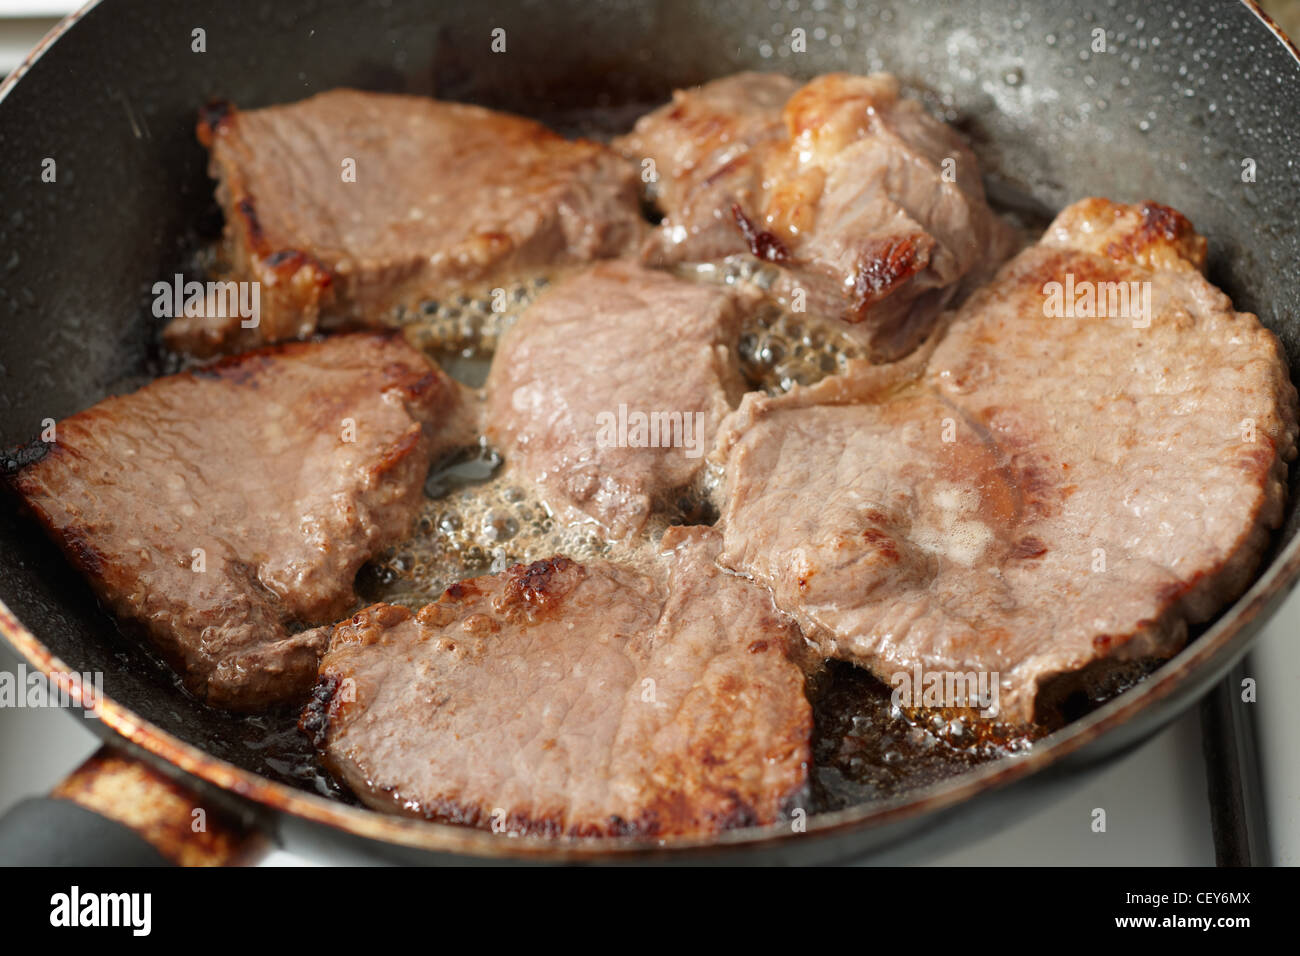 Frying fresh veal fillet in a frying pan Stock Photo